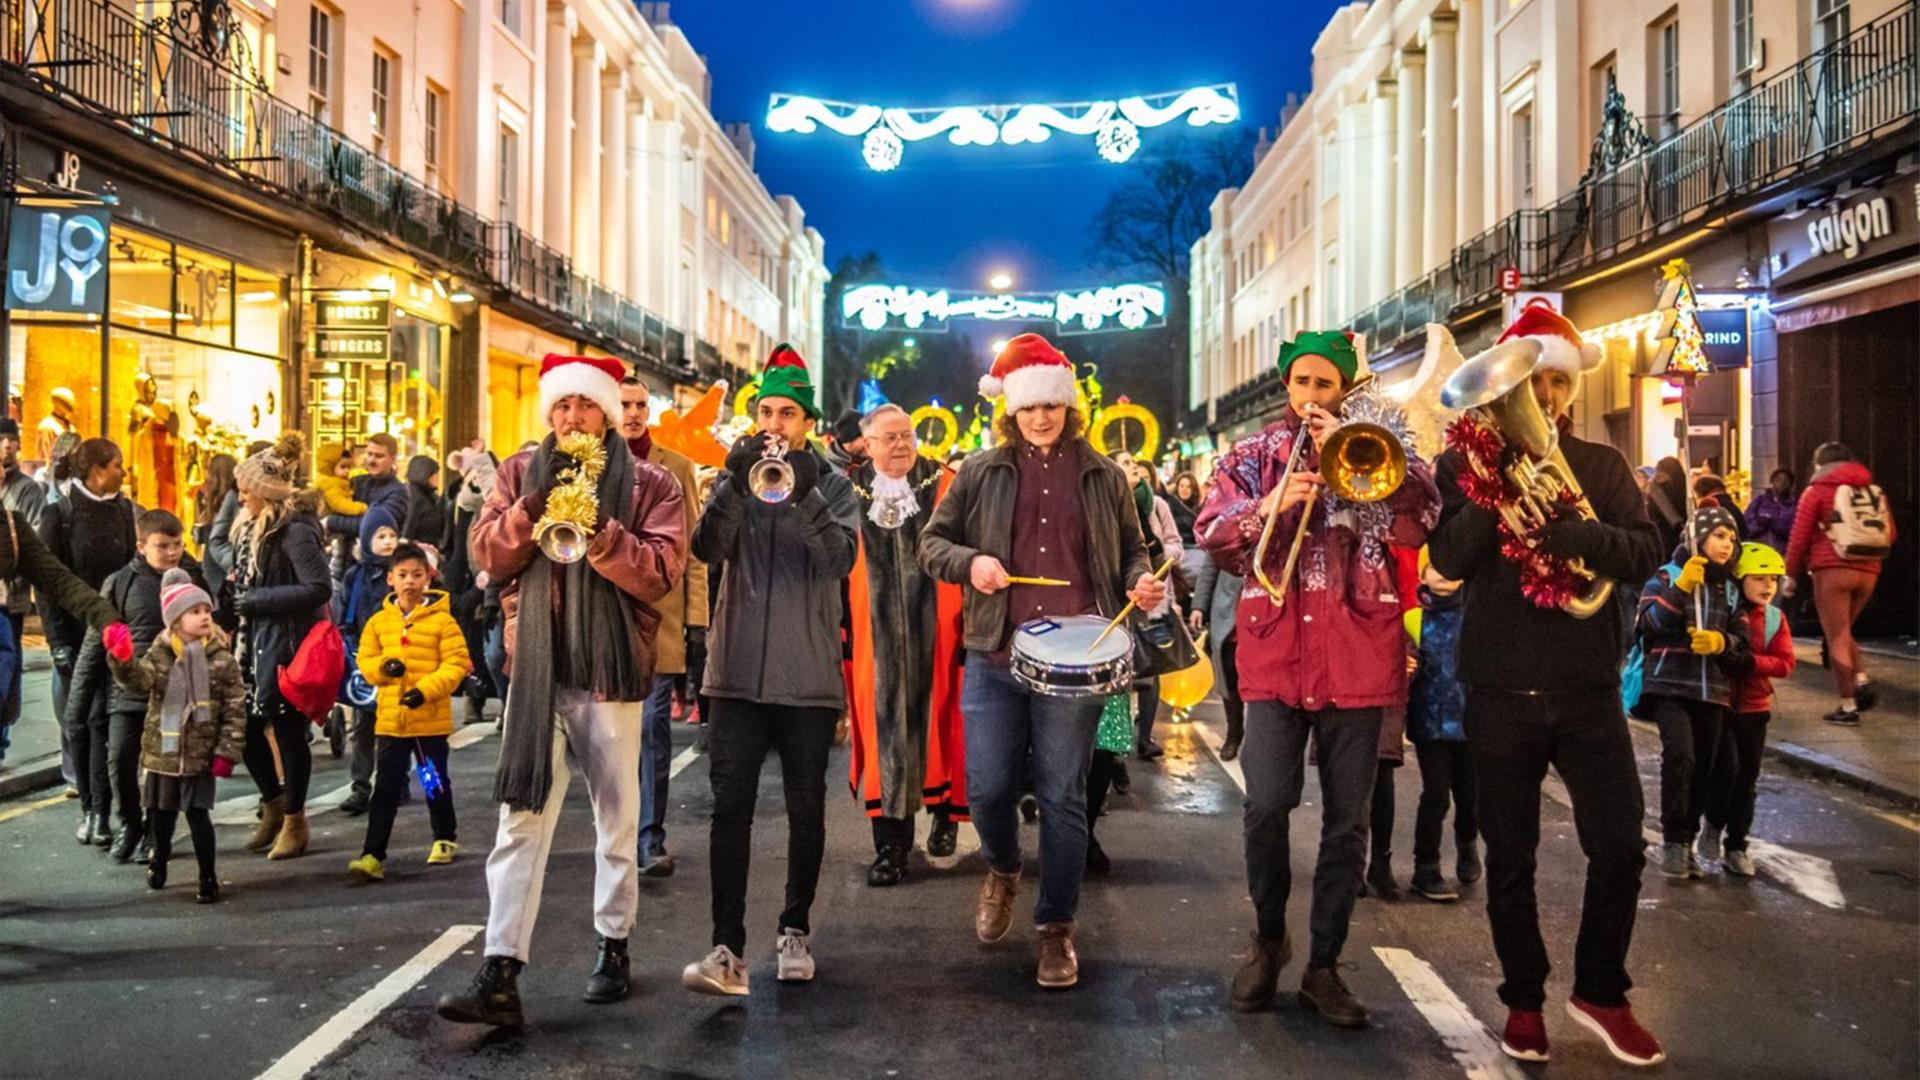 A group of trumpeters lead the lantern parade through Greenwich at Christmas